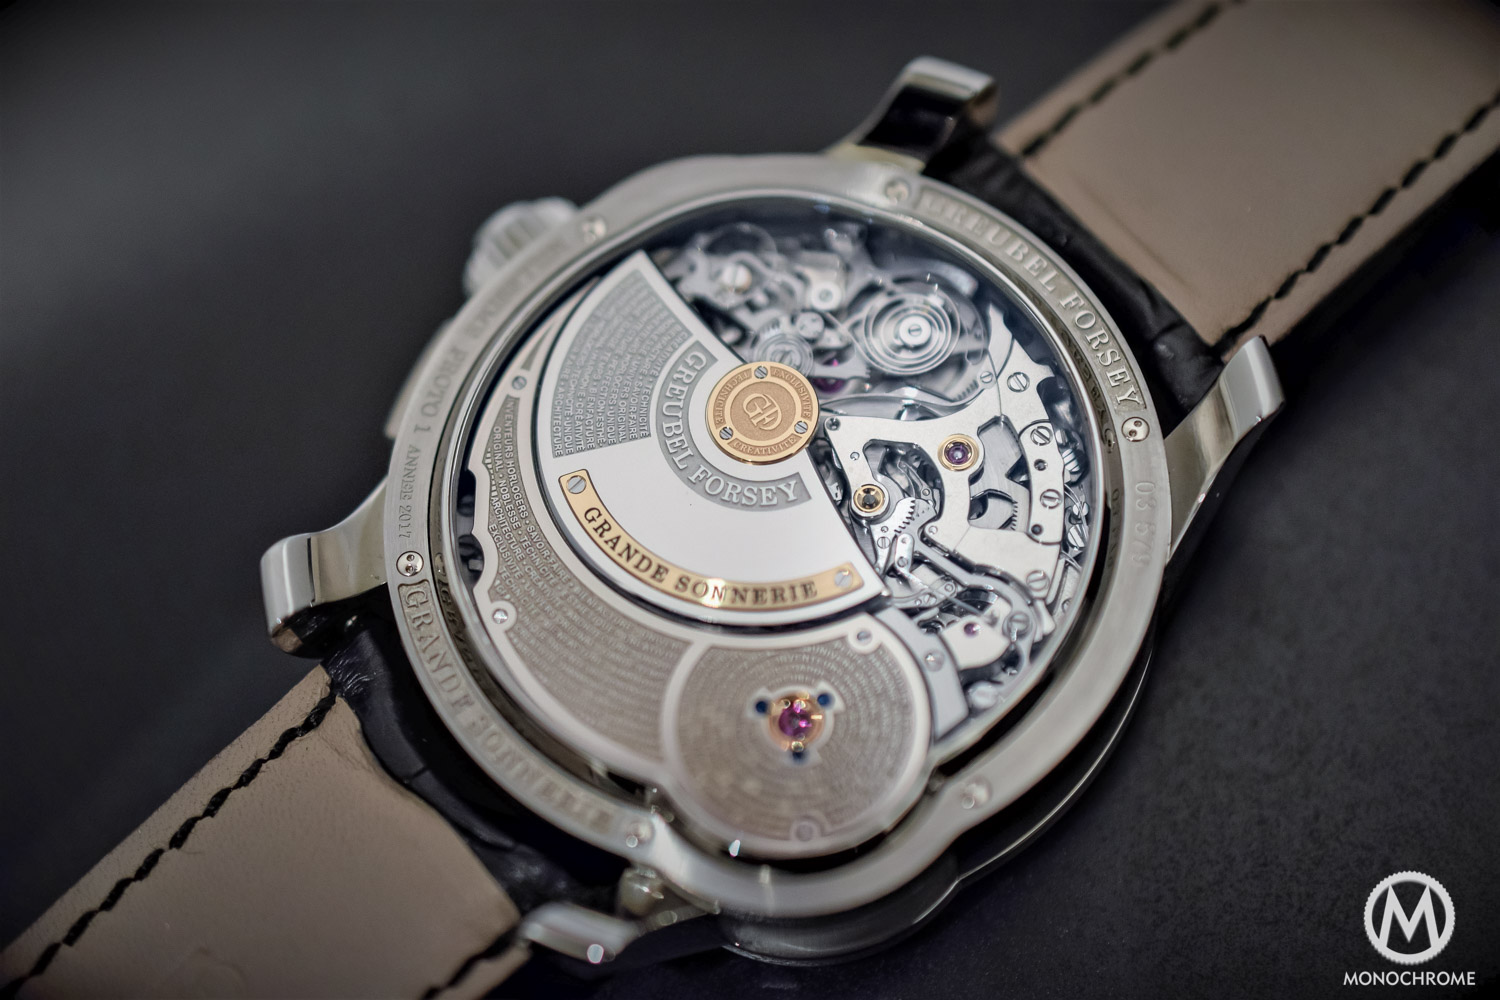 Greubel Forsey Grande Sonnerie - SIHH 2017 review